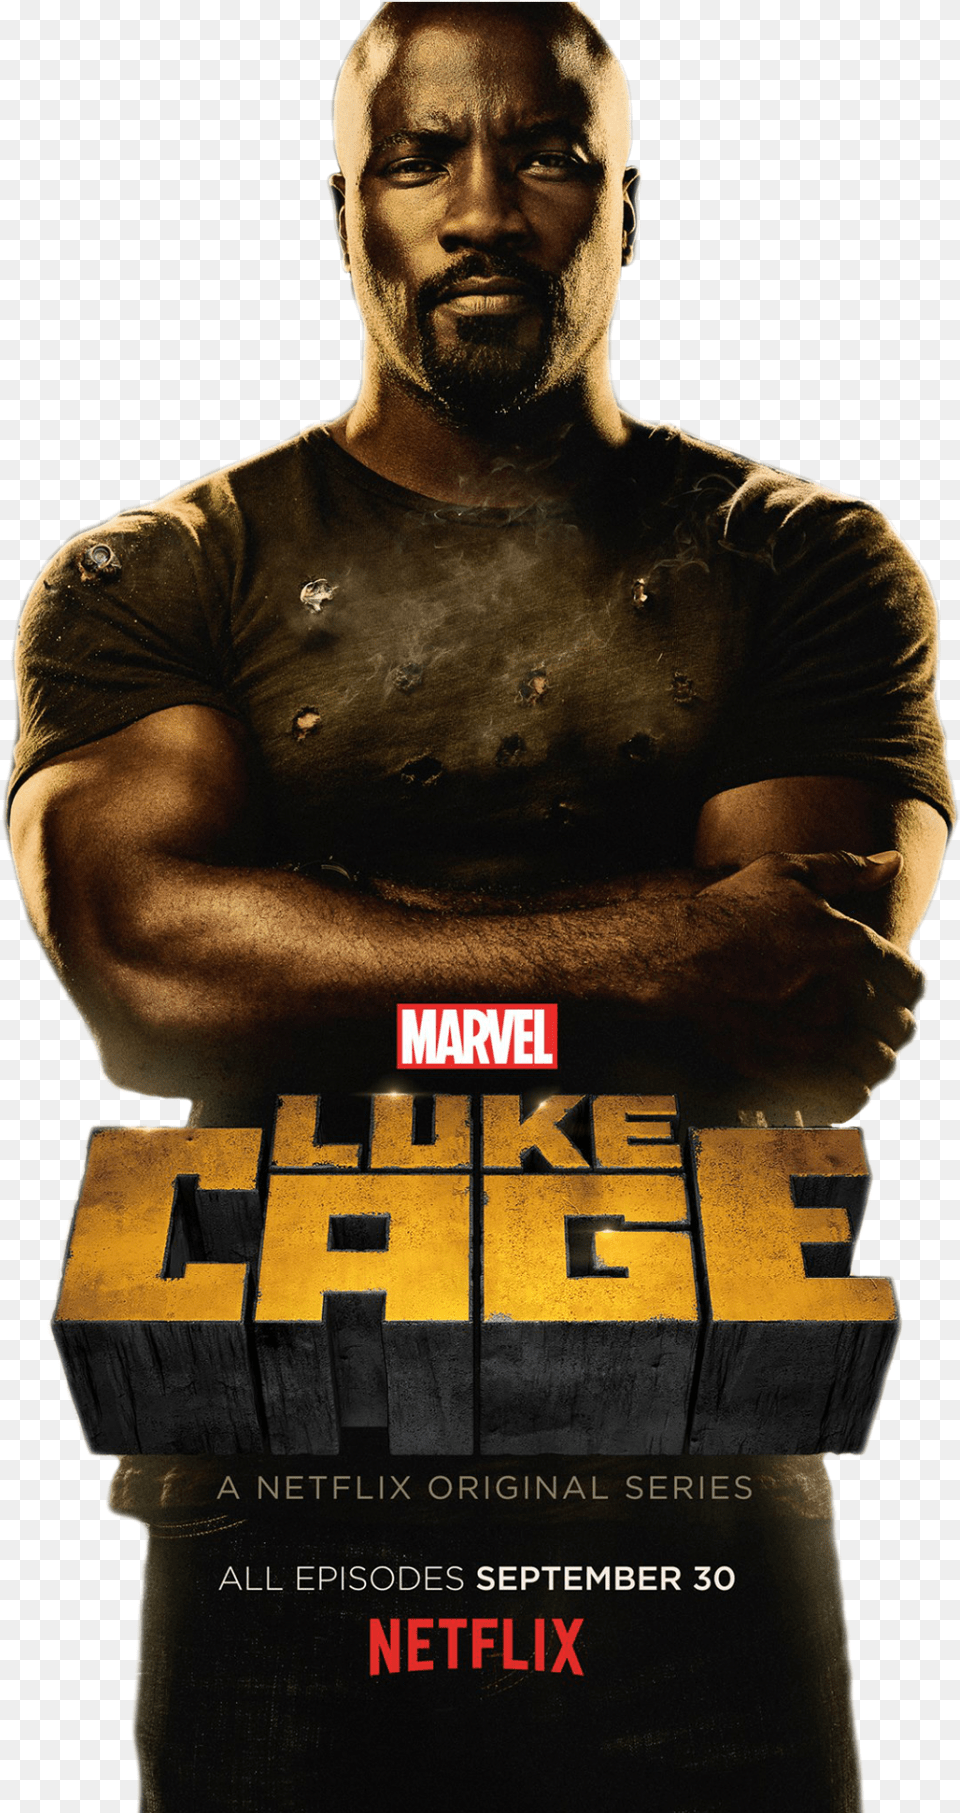 From Todays New Poster For Marvels Luke Cage Marvel Super Hero Luke Cage, T-shirt, Advertisement, Clothing, Publication Png Image